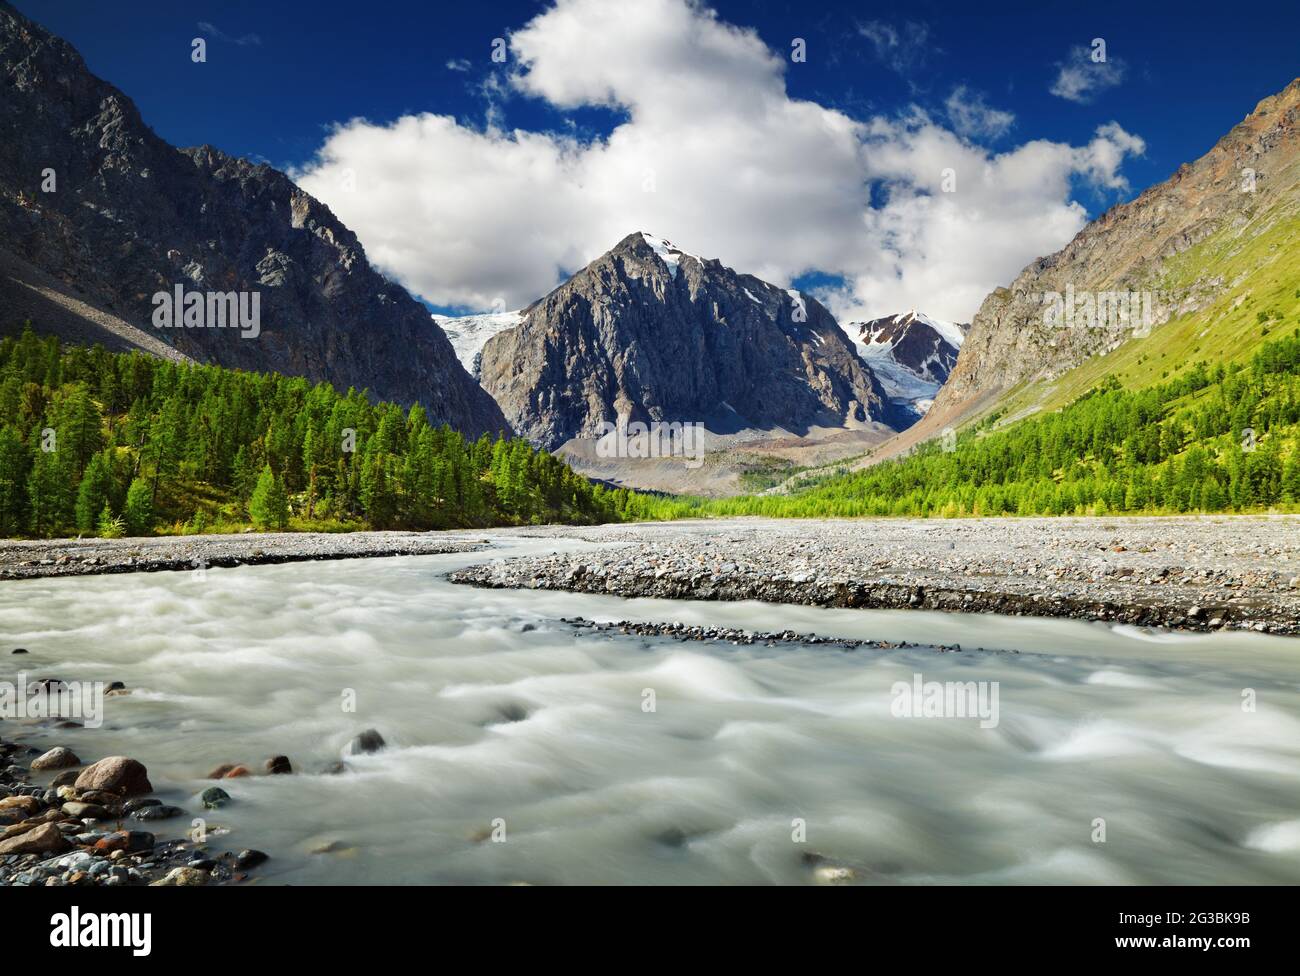 Mountain valley with river and green forest, Altai mountains, Russia Stock Photo